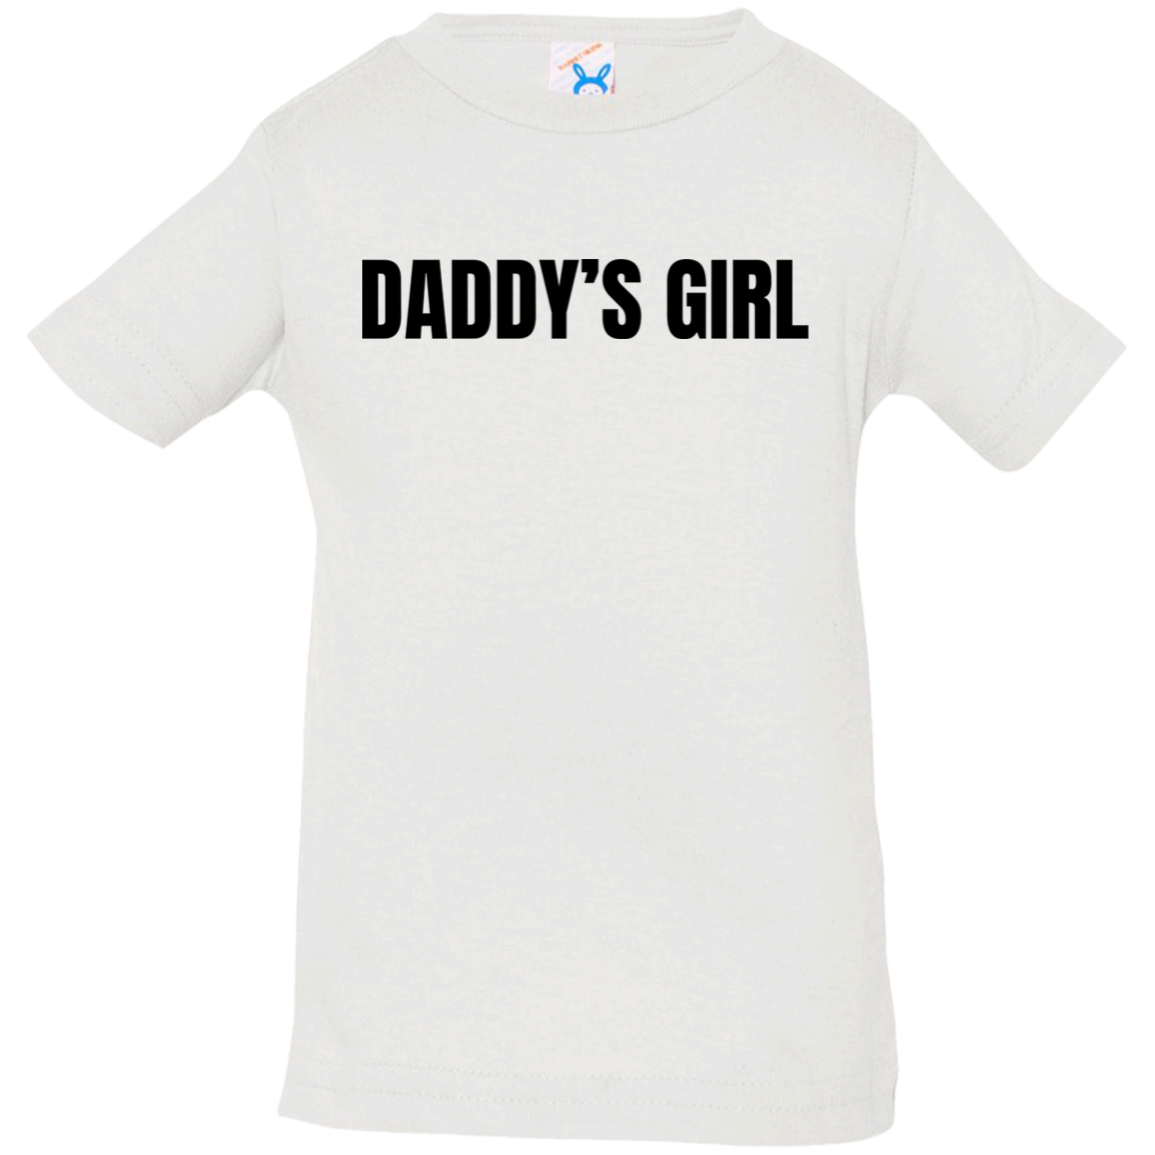 Daddy's Girl -  6, 12, 18, & 24 Month Girl's Jersey T-Shirt